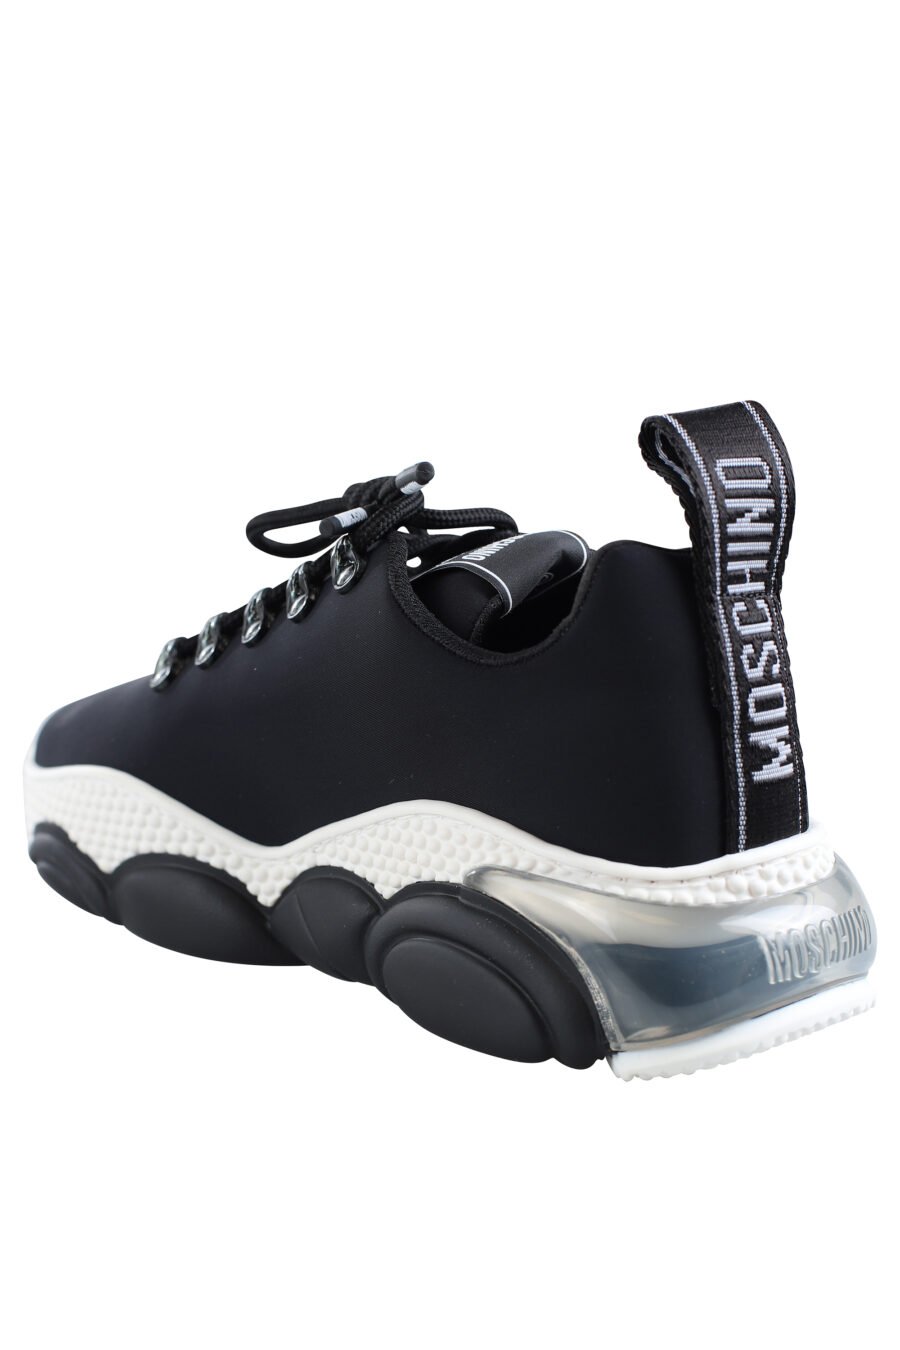 Black and white neoprene trainers with teddy sole - IMG 1964